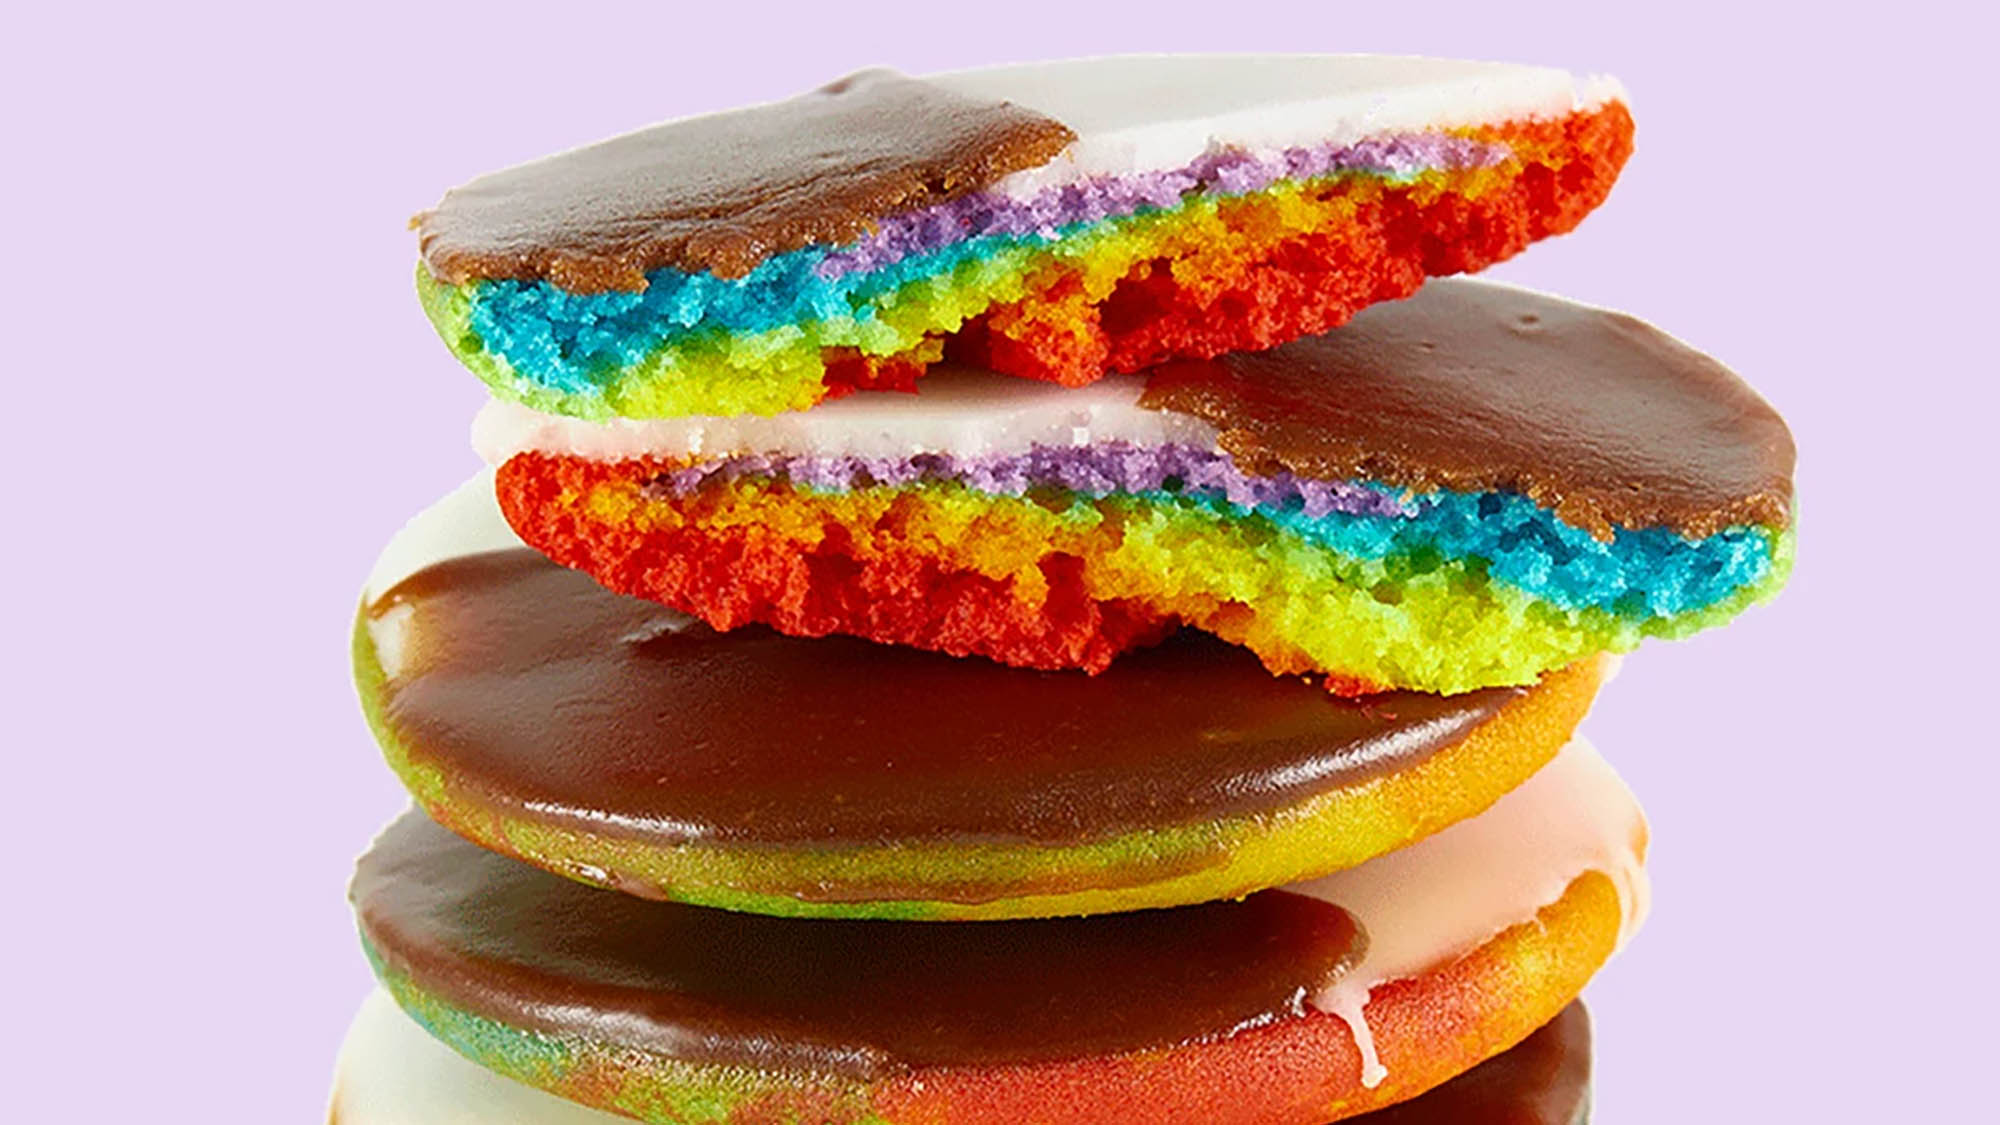 Stack of rainbow cookies with brown and white icing and top cookie broken in two pieces